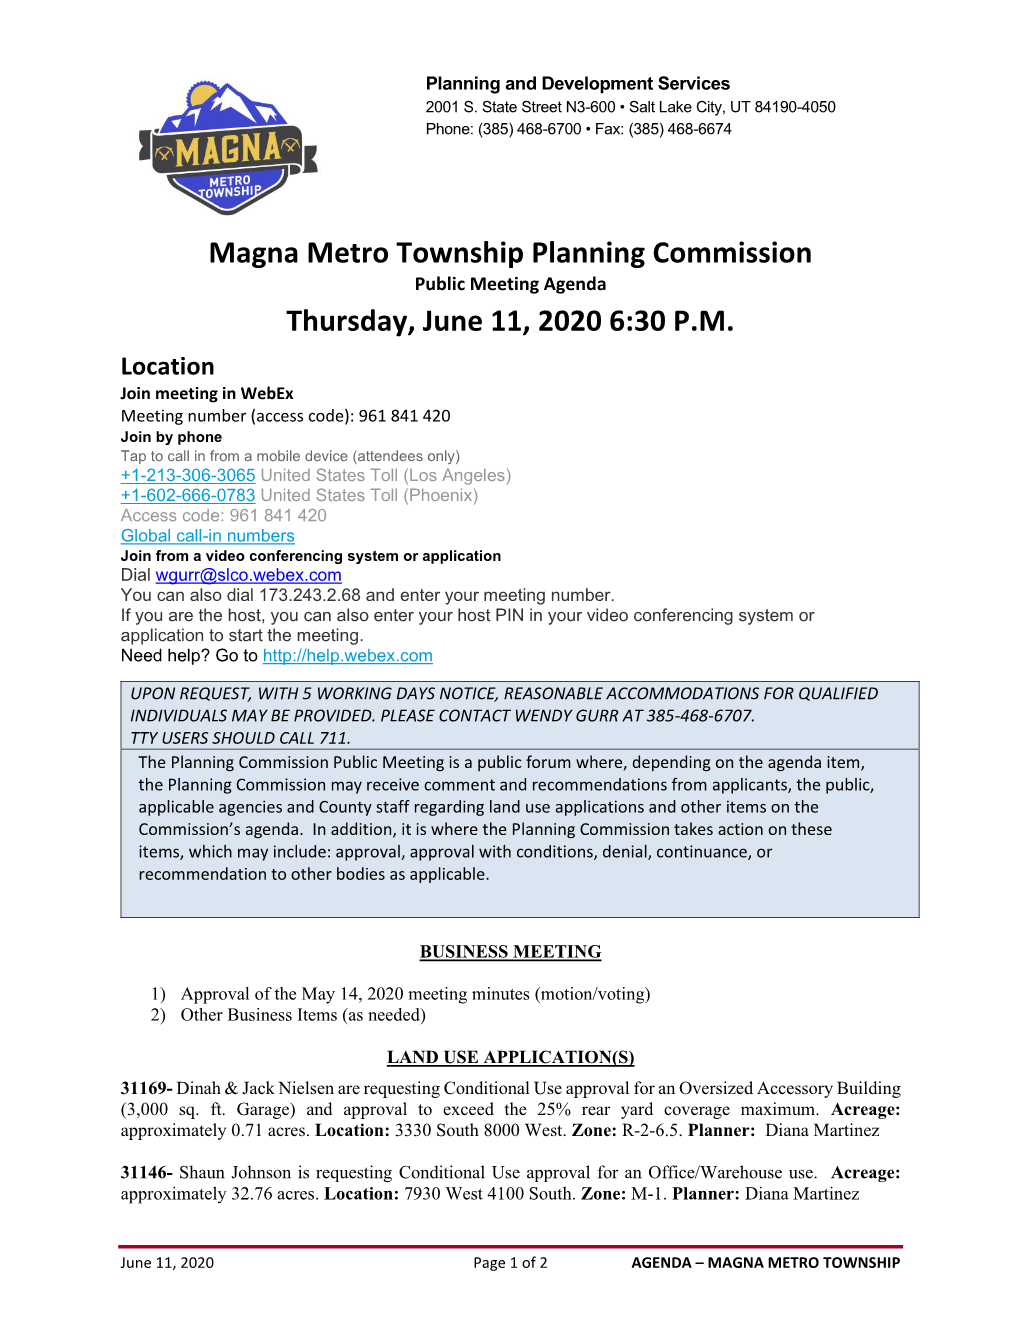 Magna Metro Township Planning Commission Thursday